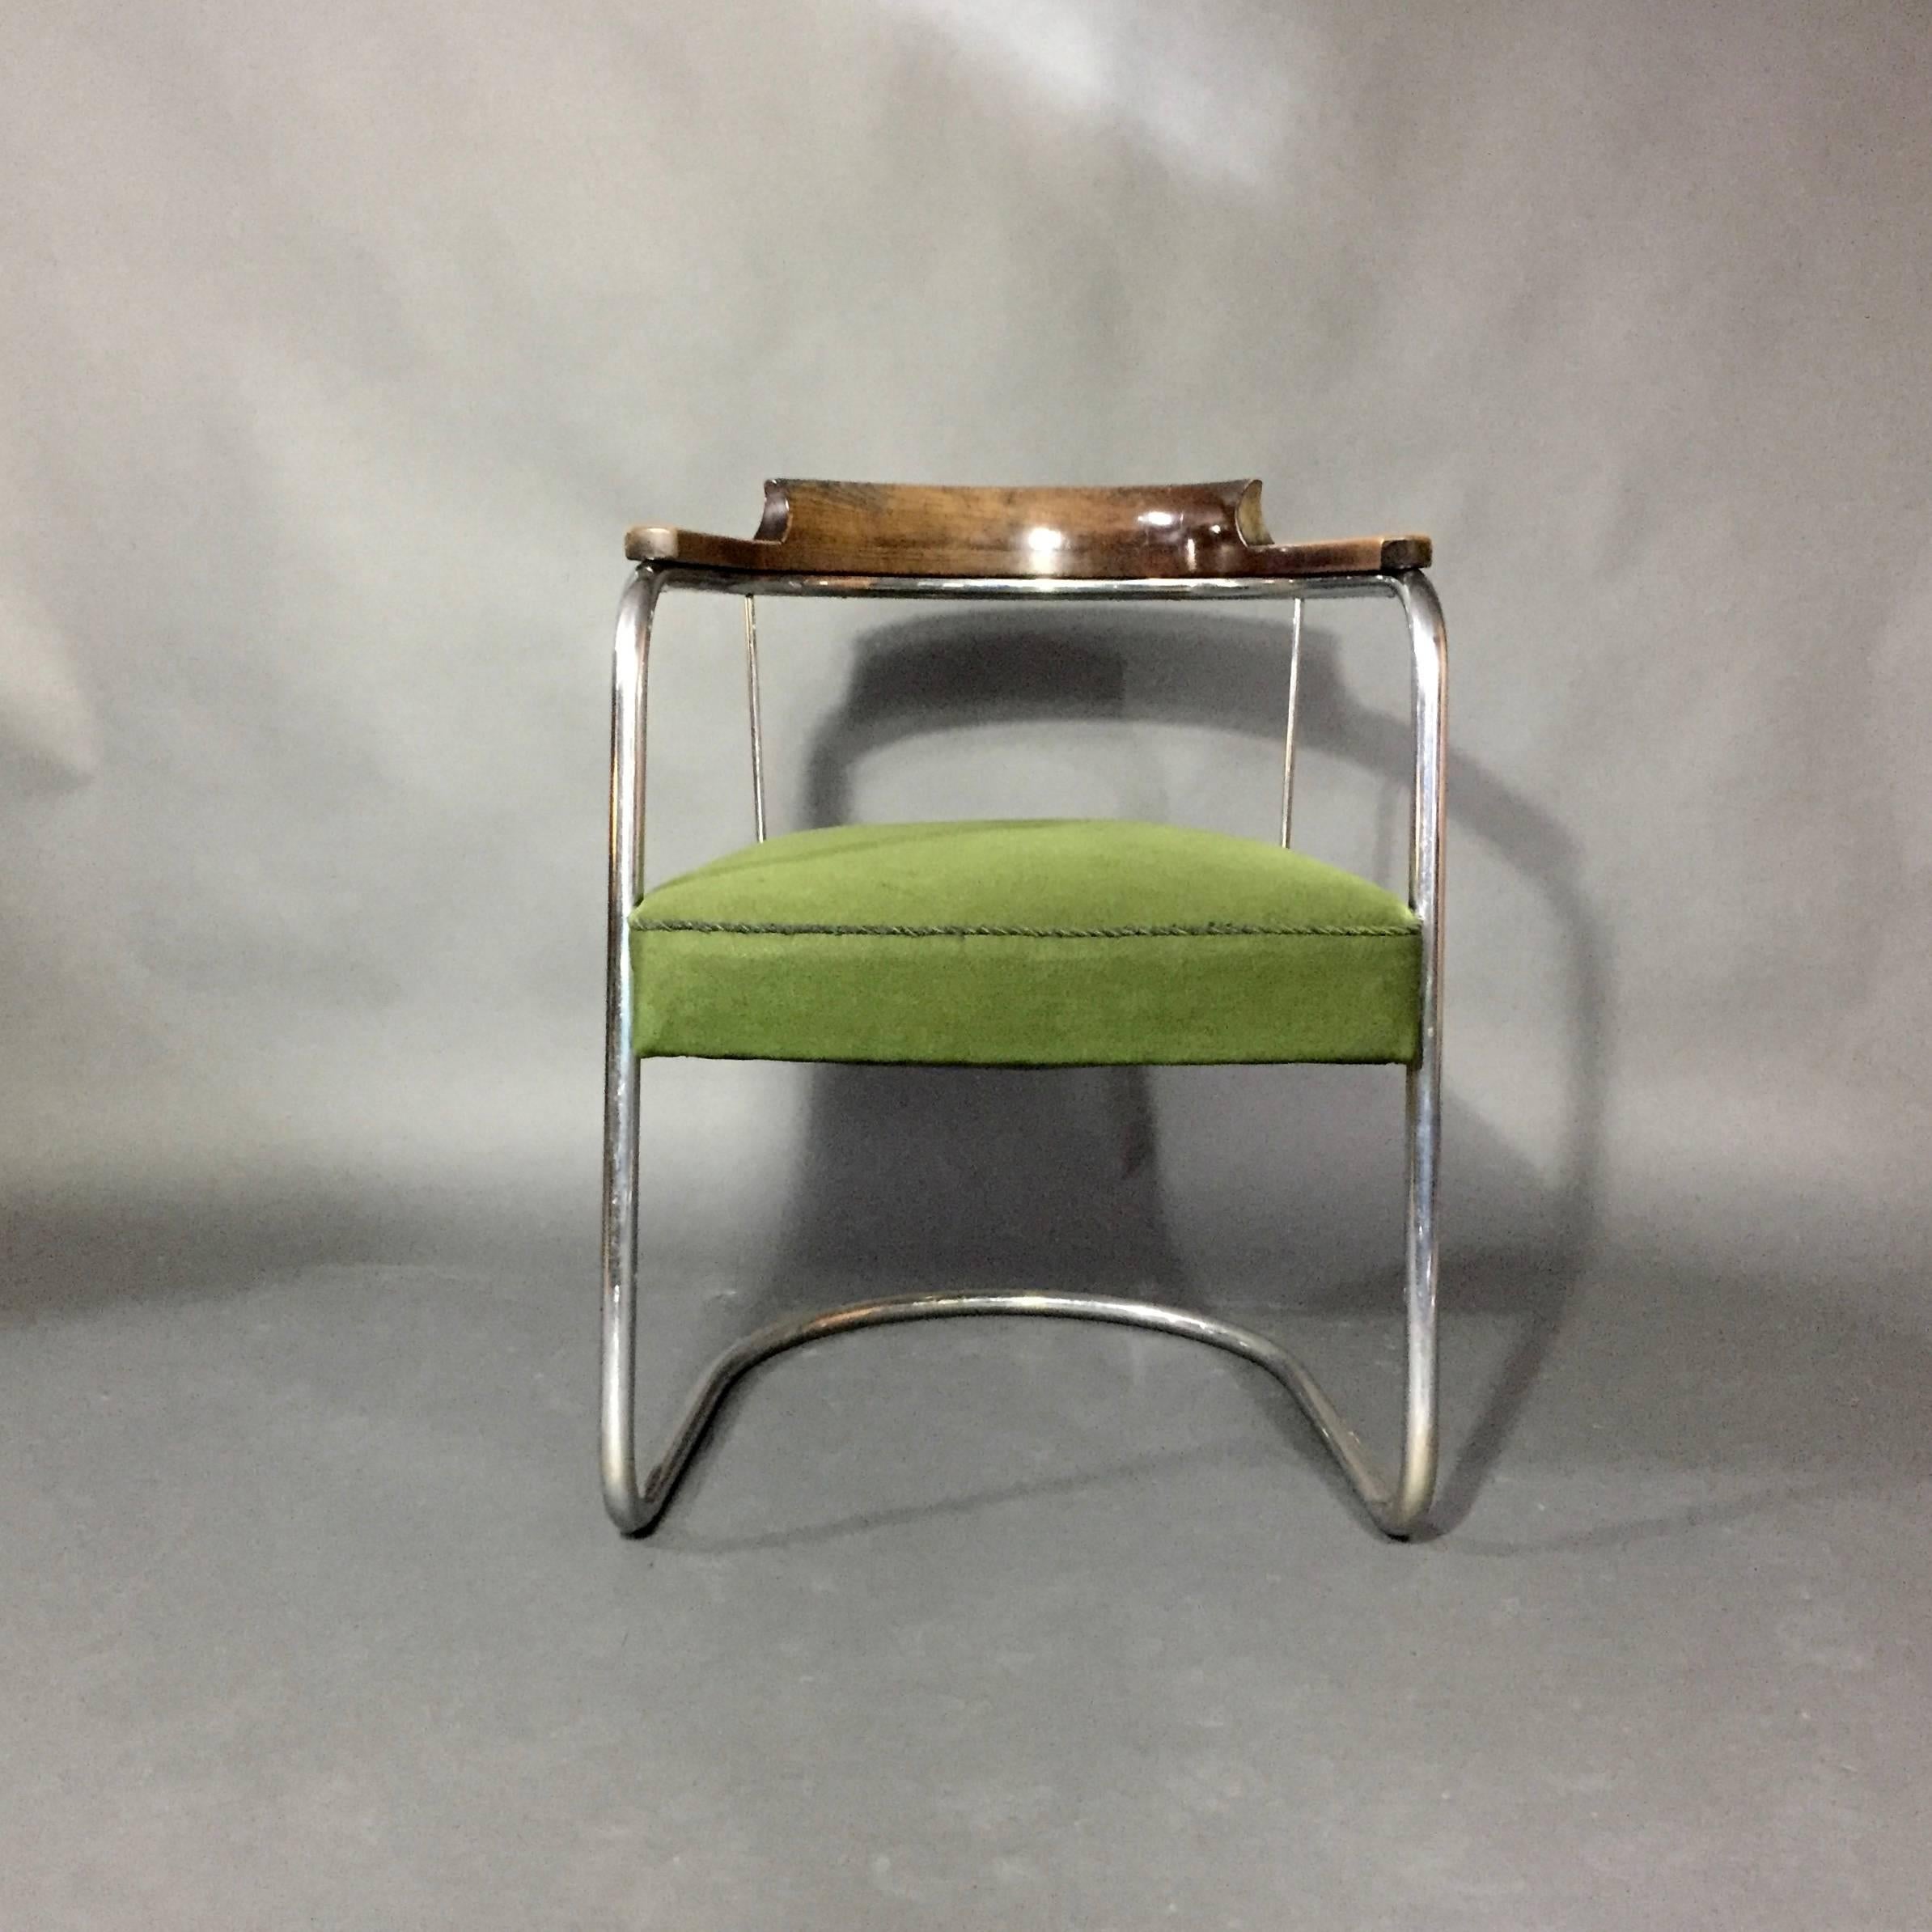 From the Bauhaus era, either Scandinavian or Continental from the late 1930s.  Exceptional design with beautifully lacquered carved back and arms supported on tubular chrome base.  A perfect desk or side chair with a nice forest green upholstery. 